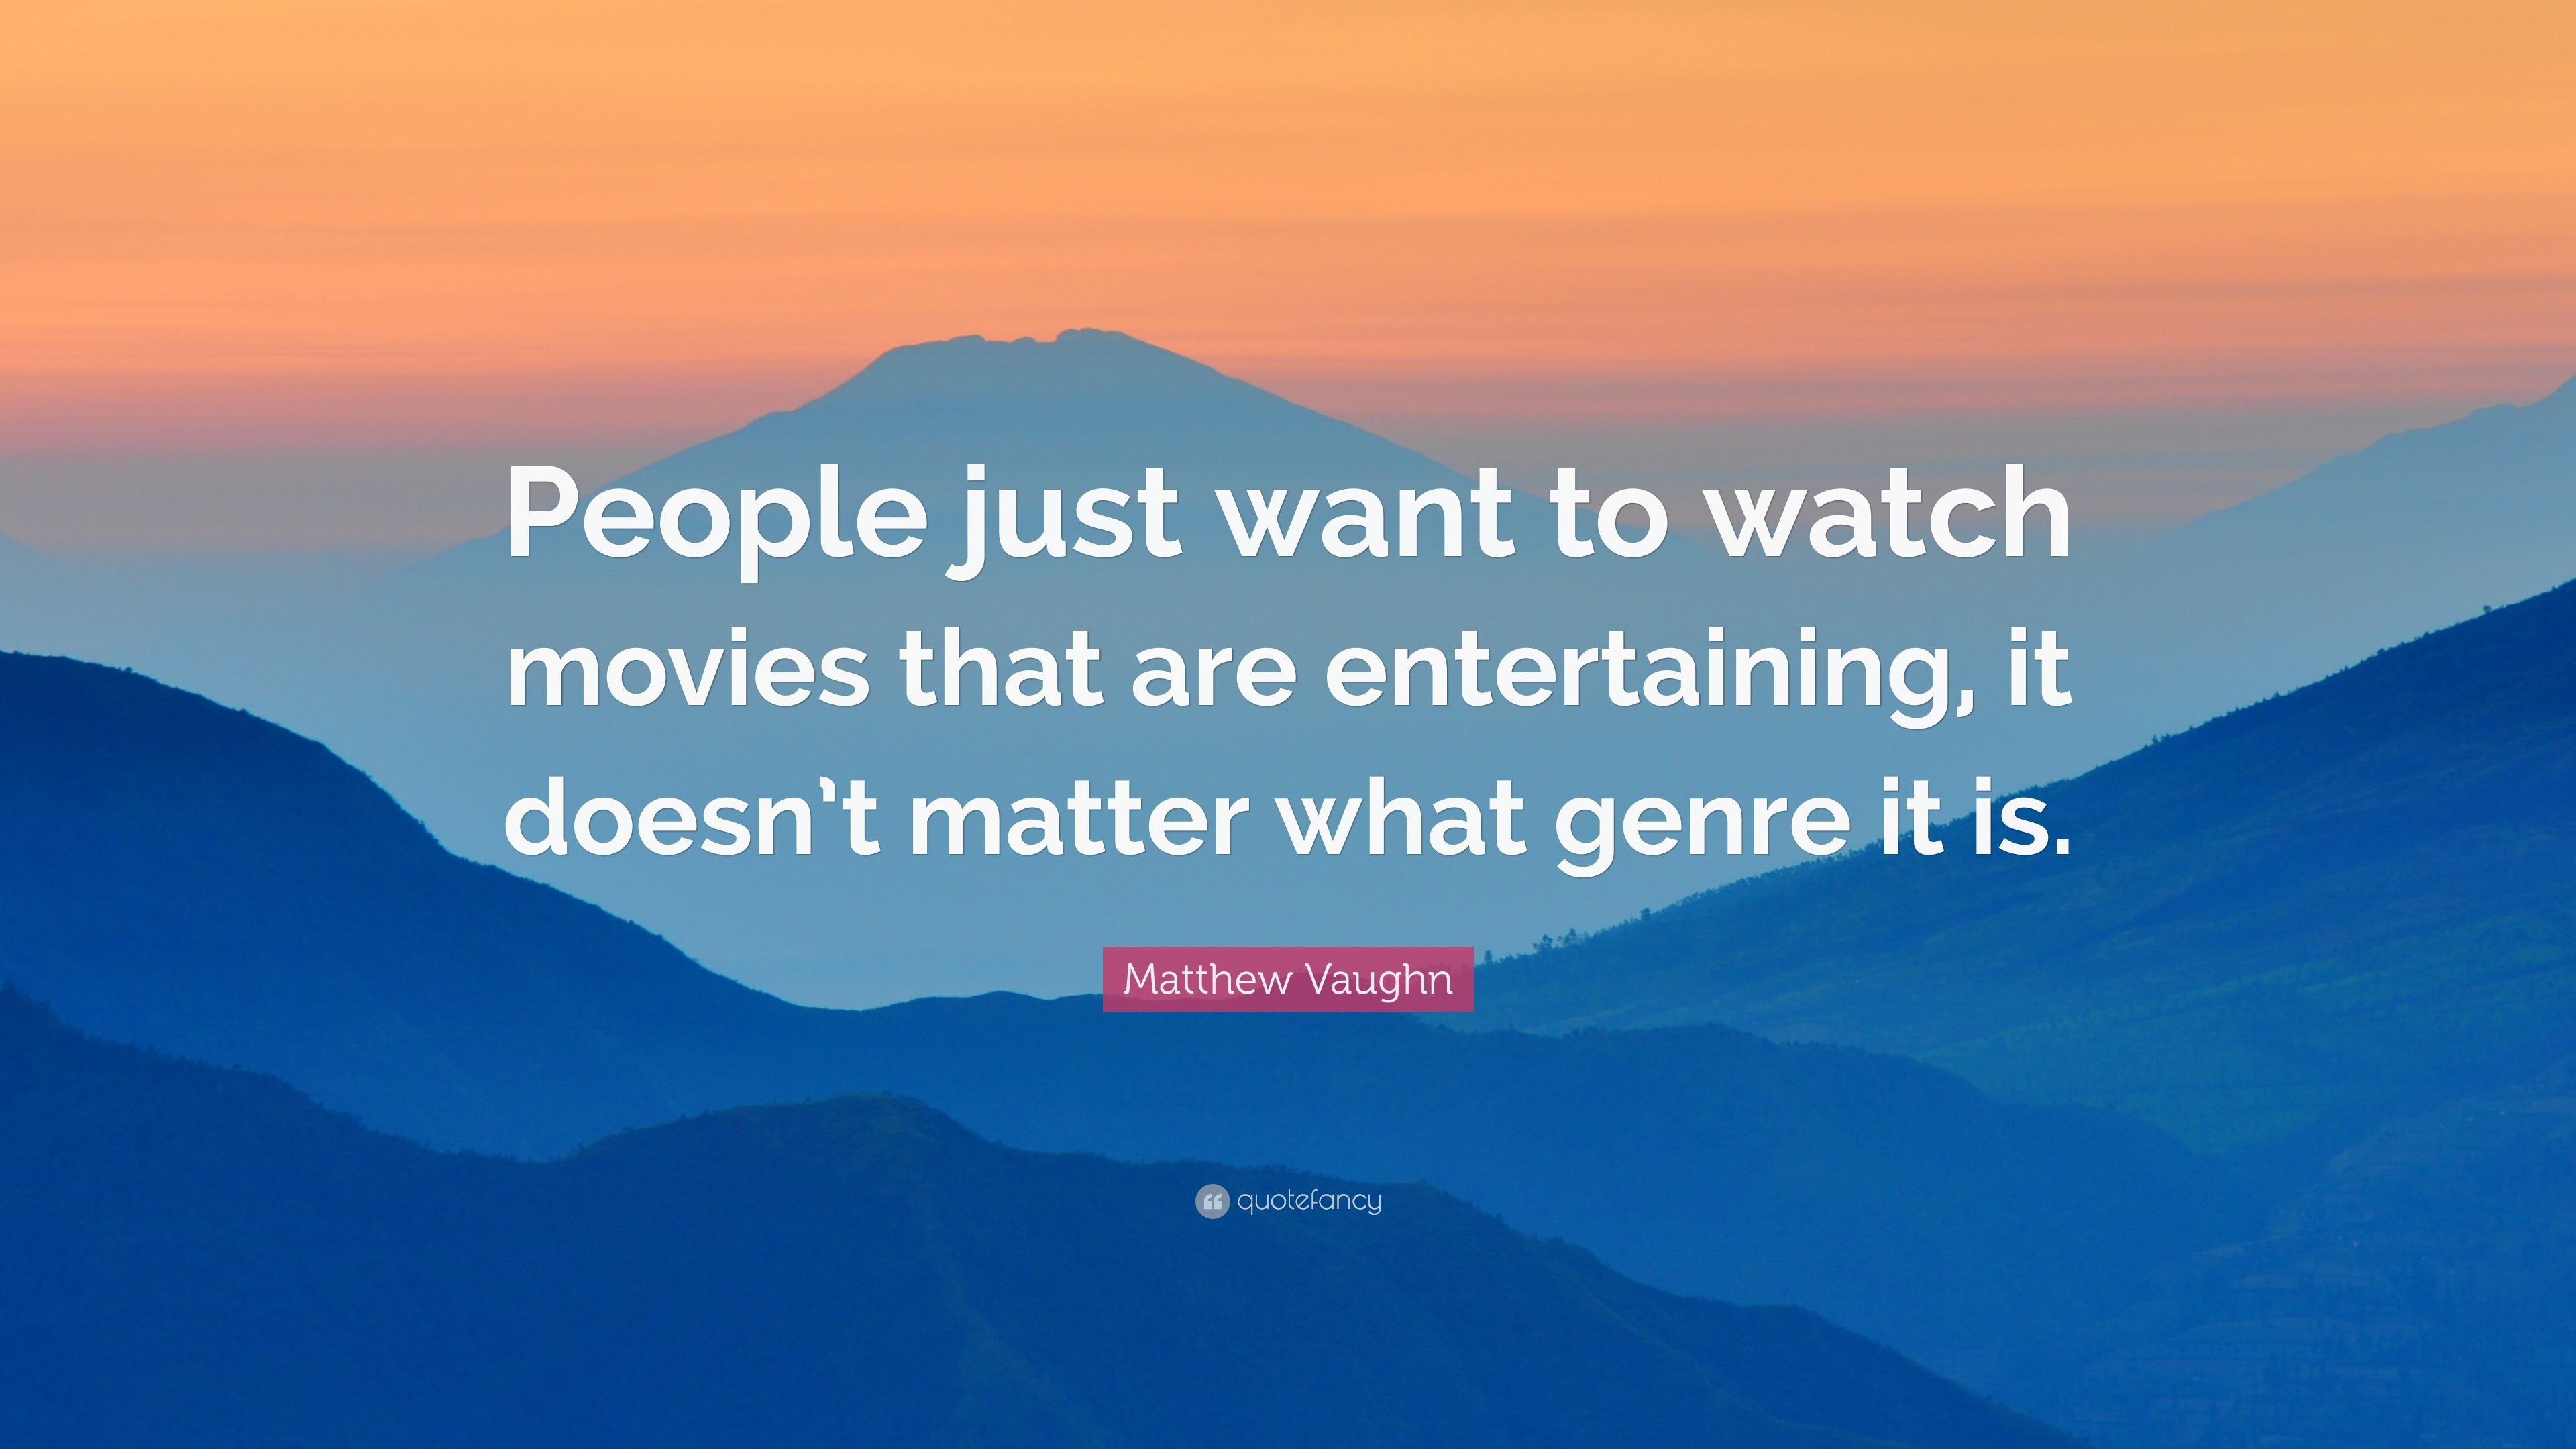 Matthew Vaughn Quote: “People just want to watch movies that are